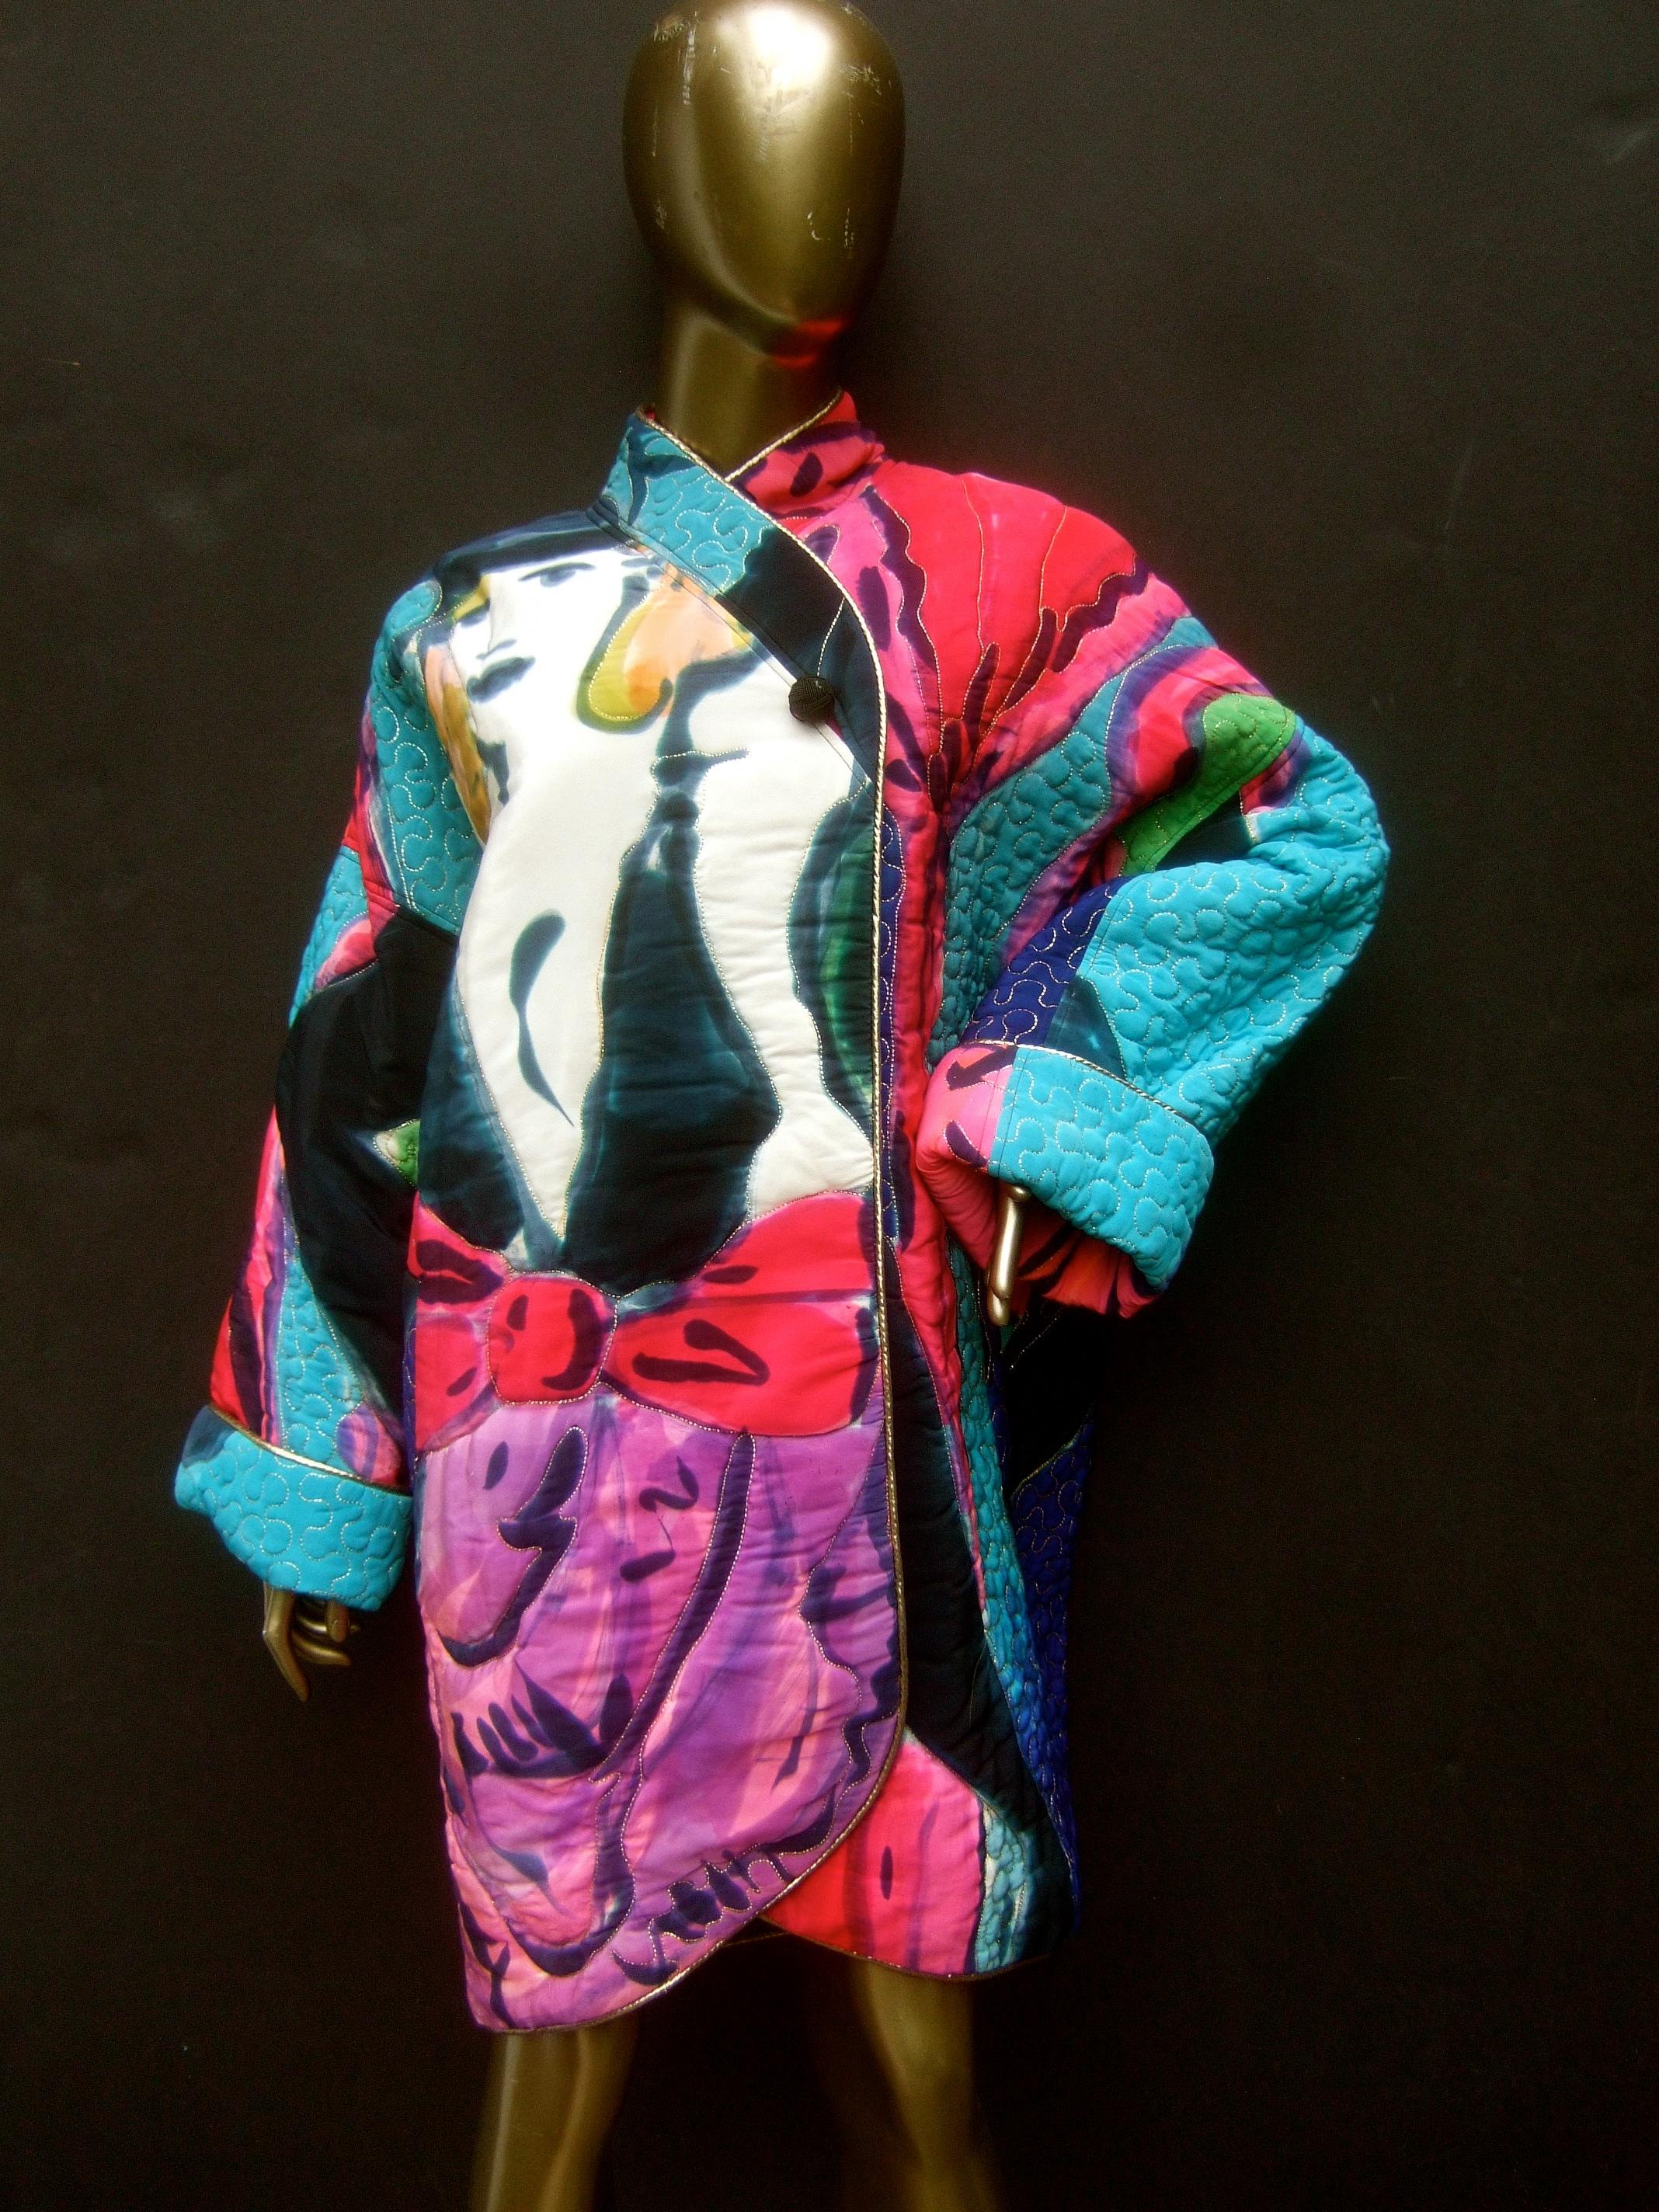 Avant-garde graphic silk quilted print artisan cocoon style boxy jacket designed by Michael Katz for Bergdorf Goodman c 1980s

The bold eye-catching graphic silk print jacket is a collage of pastel colors and designs. Illustrated with a pair of